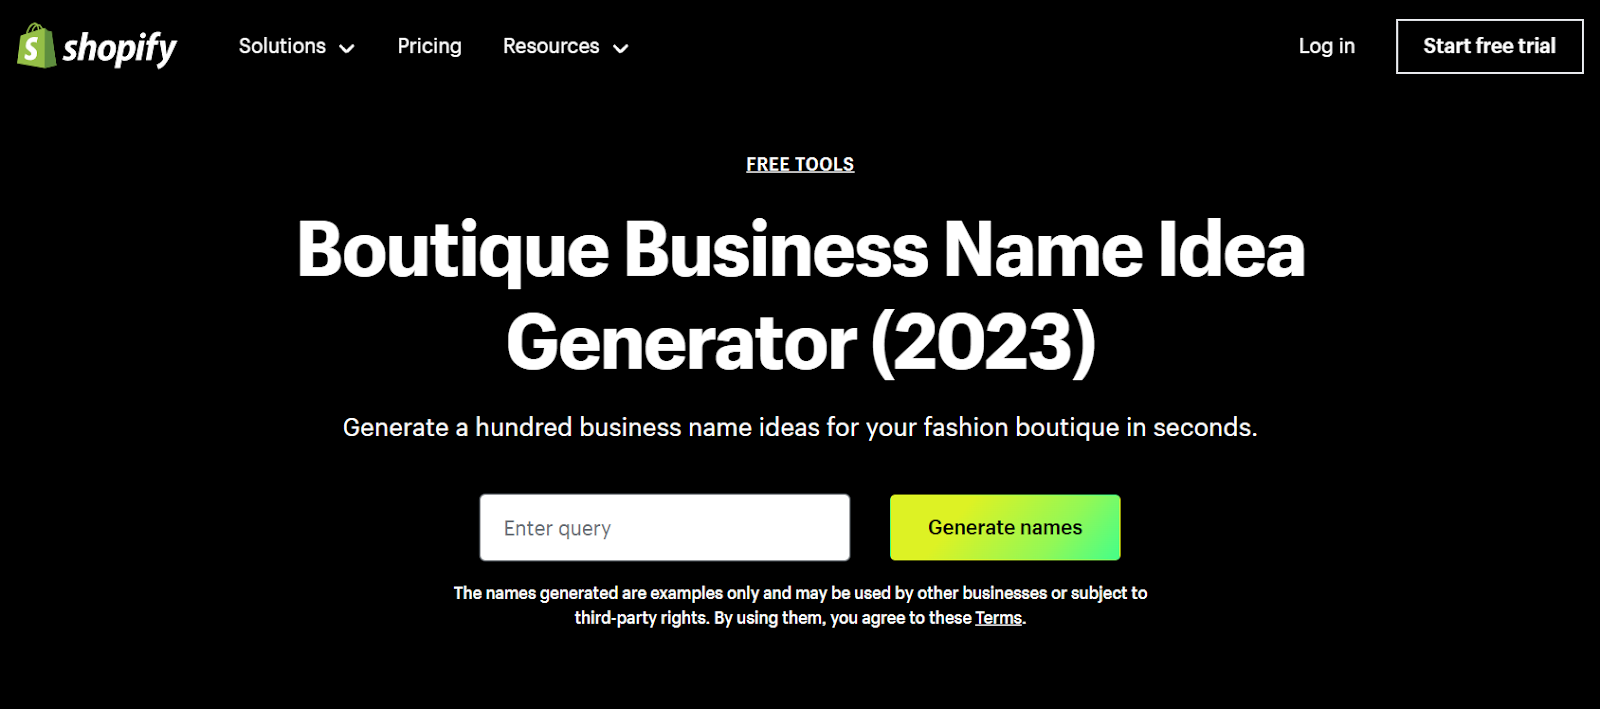 Screenshot of the landing page of Shopify’s Boutique Business Name Idea Generator